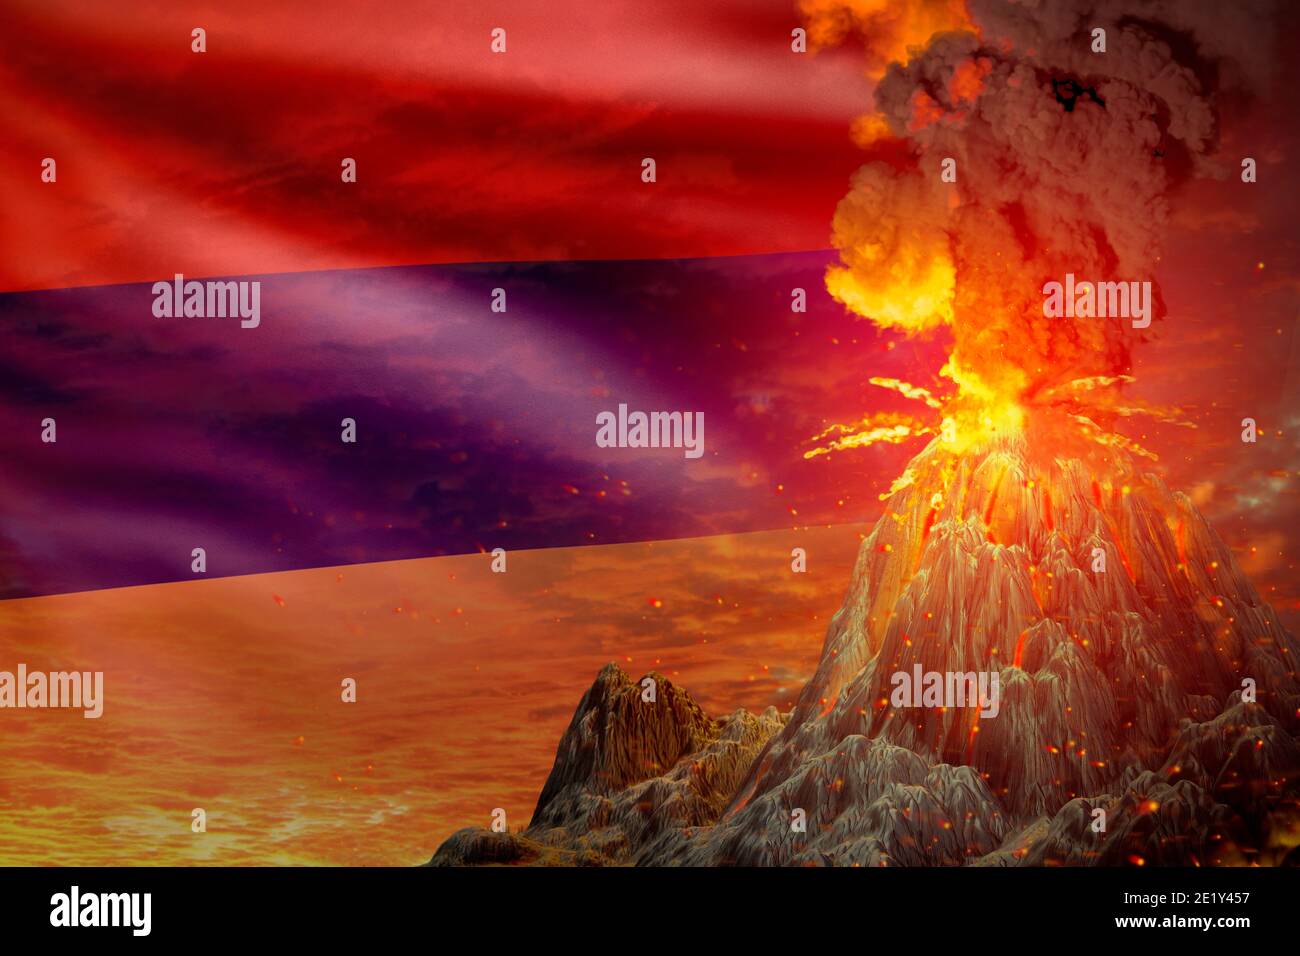 Volcano eruption Cut Out Stock Images  Pictures  Alamy